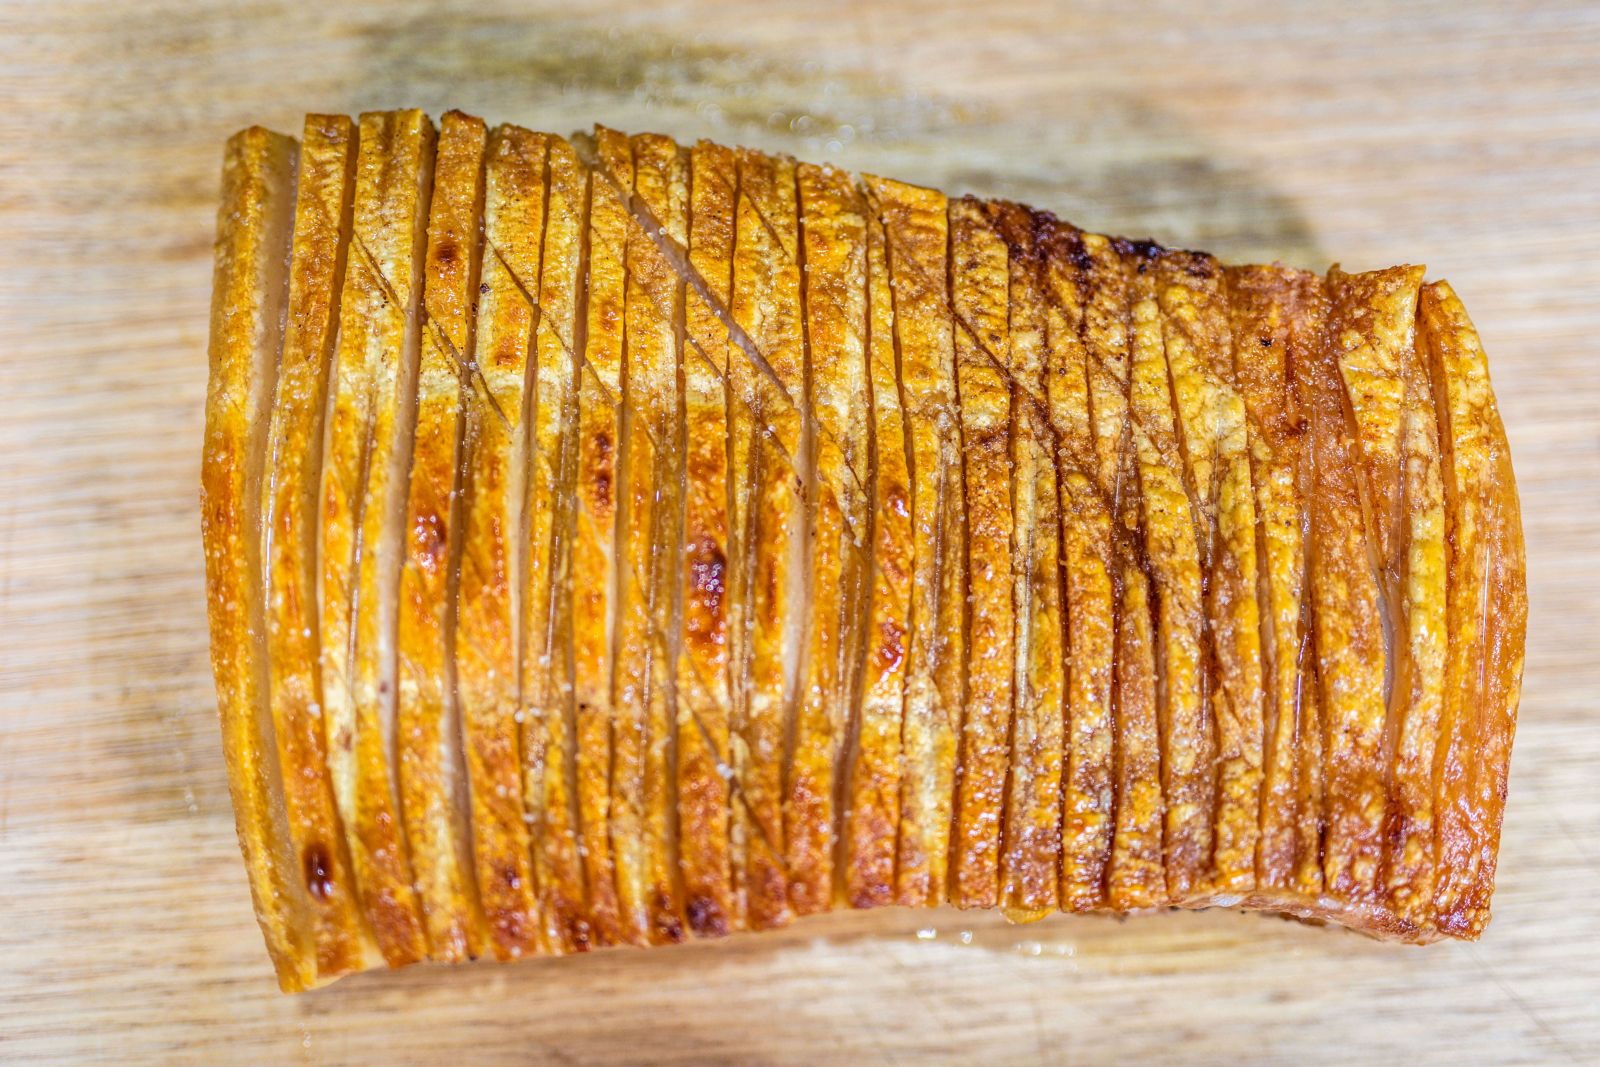 This photo shows a Roast Pork Belly